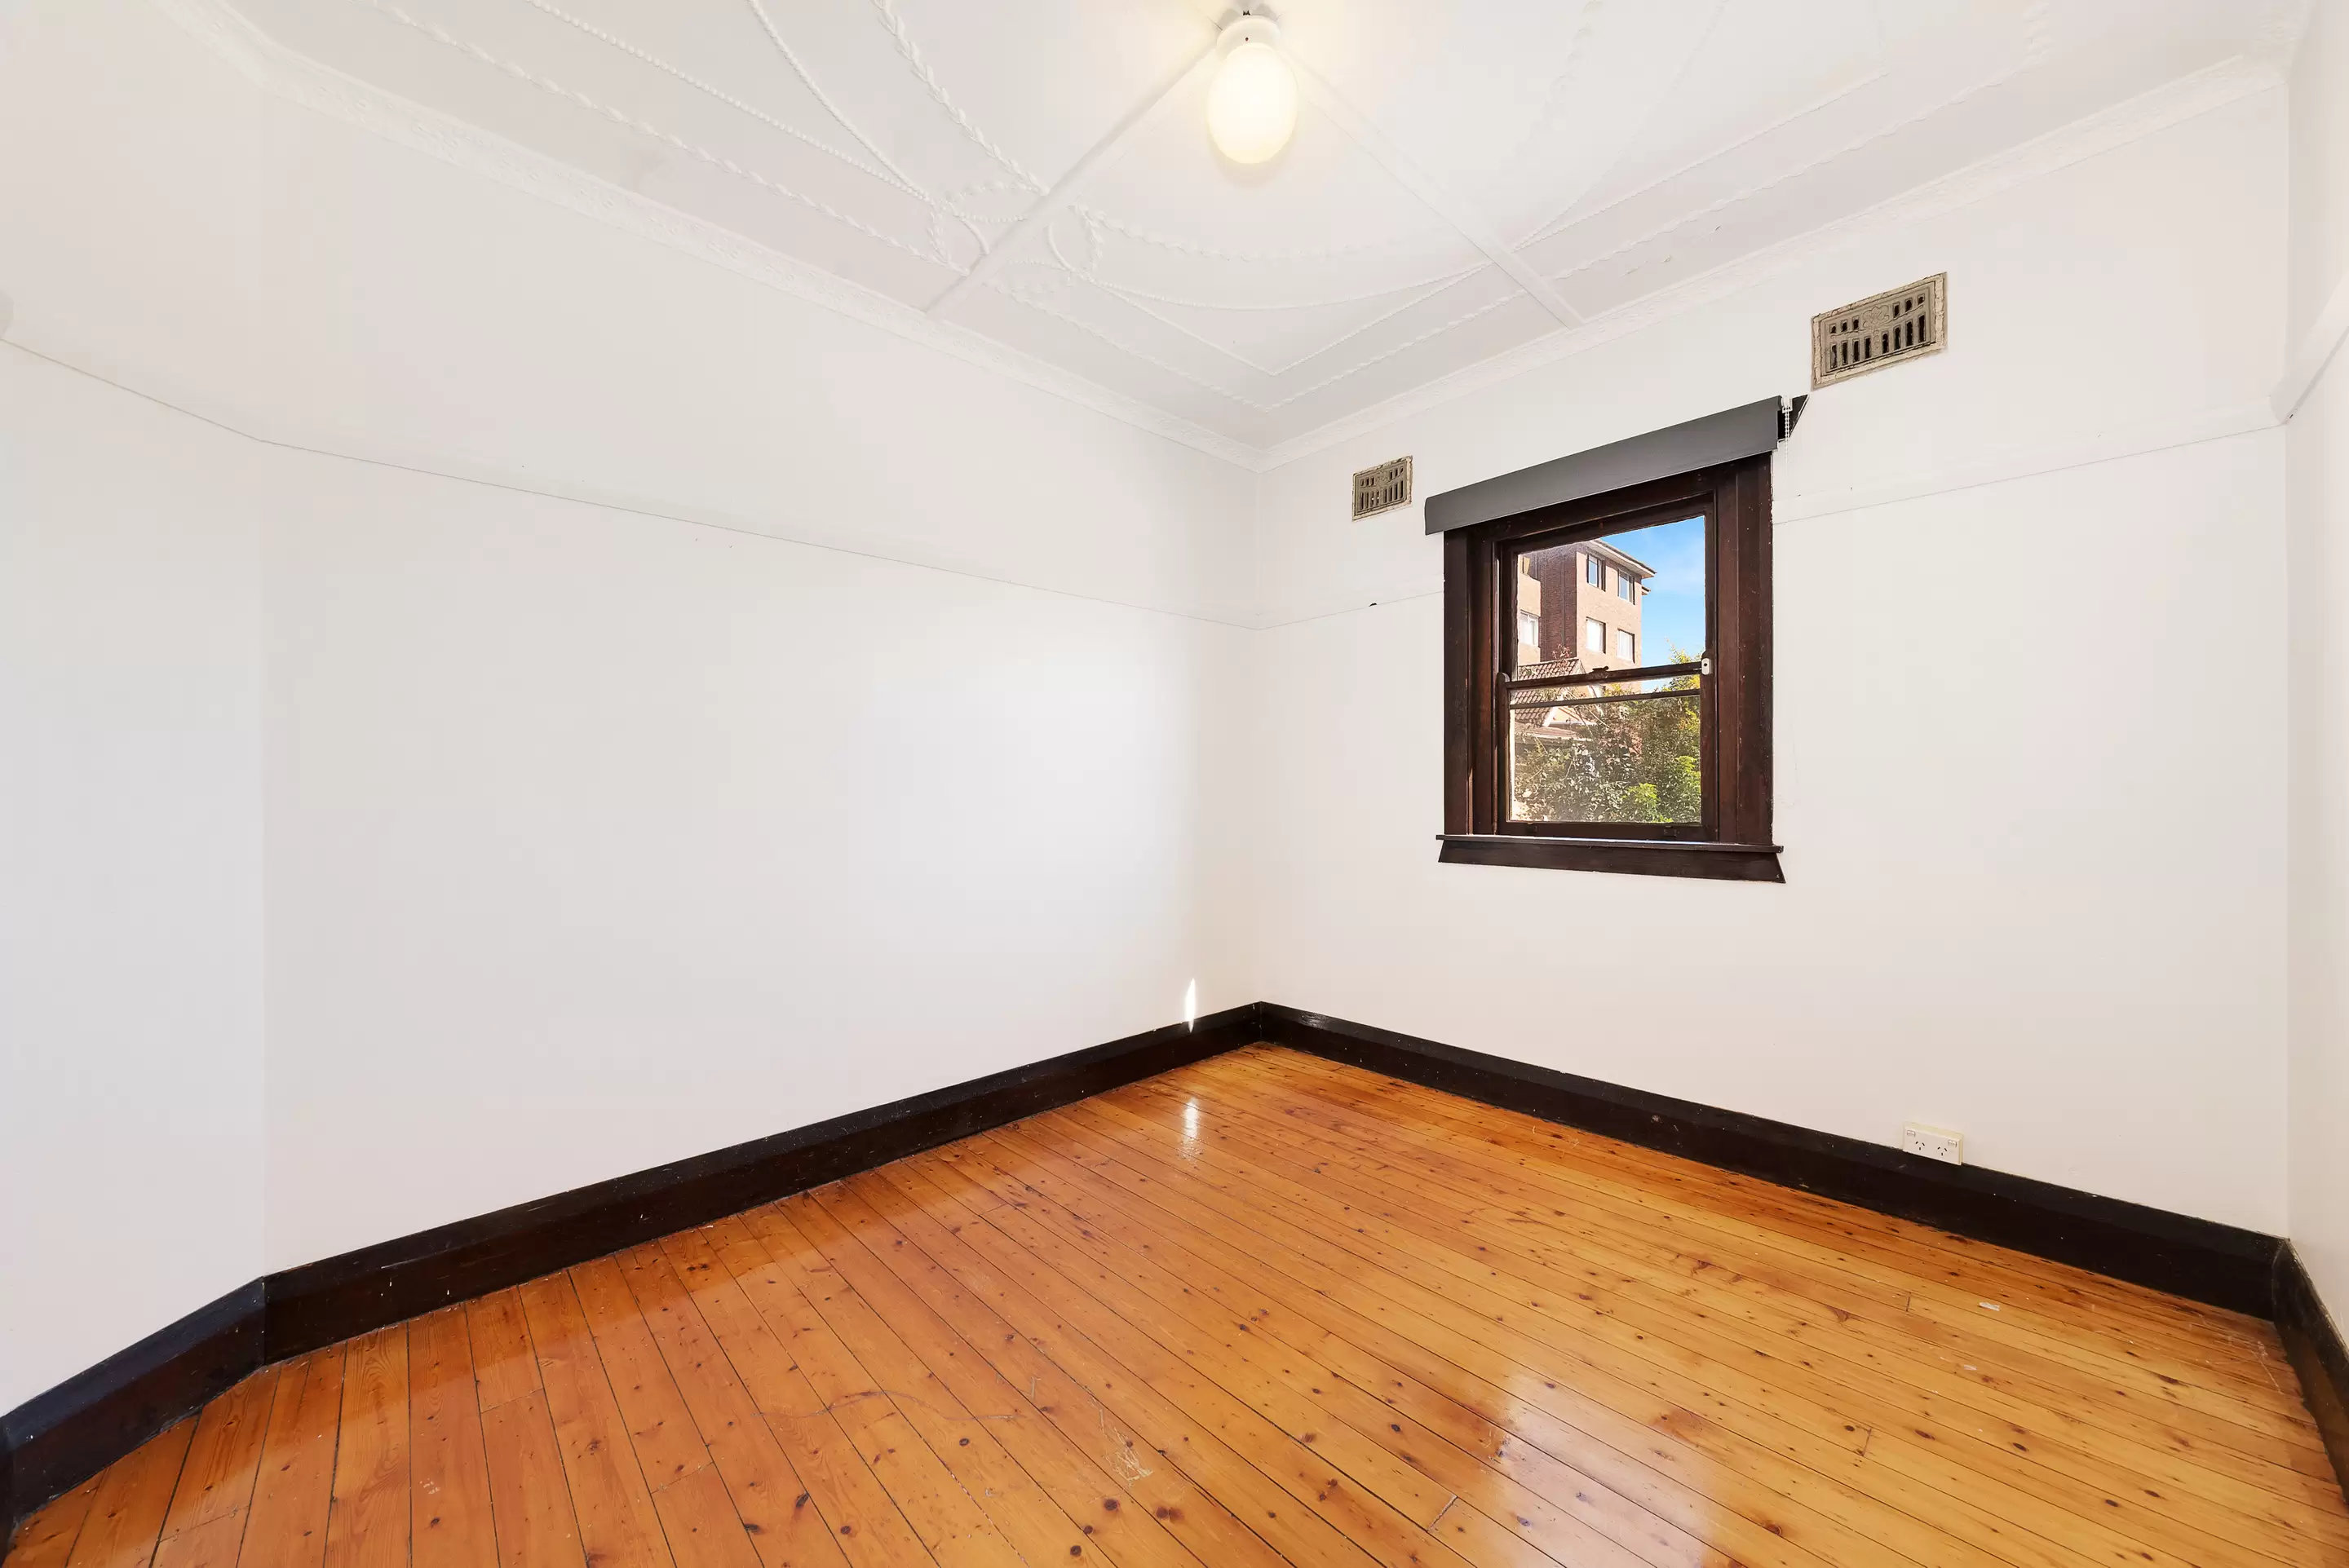 5/12 Dudley Street, Coogee For Lease by Raine & Horne Randwick | Coogee - image 4